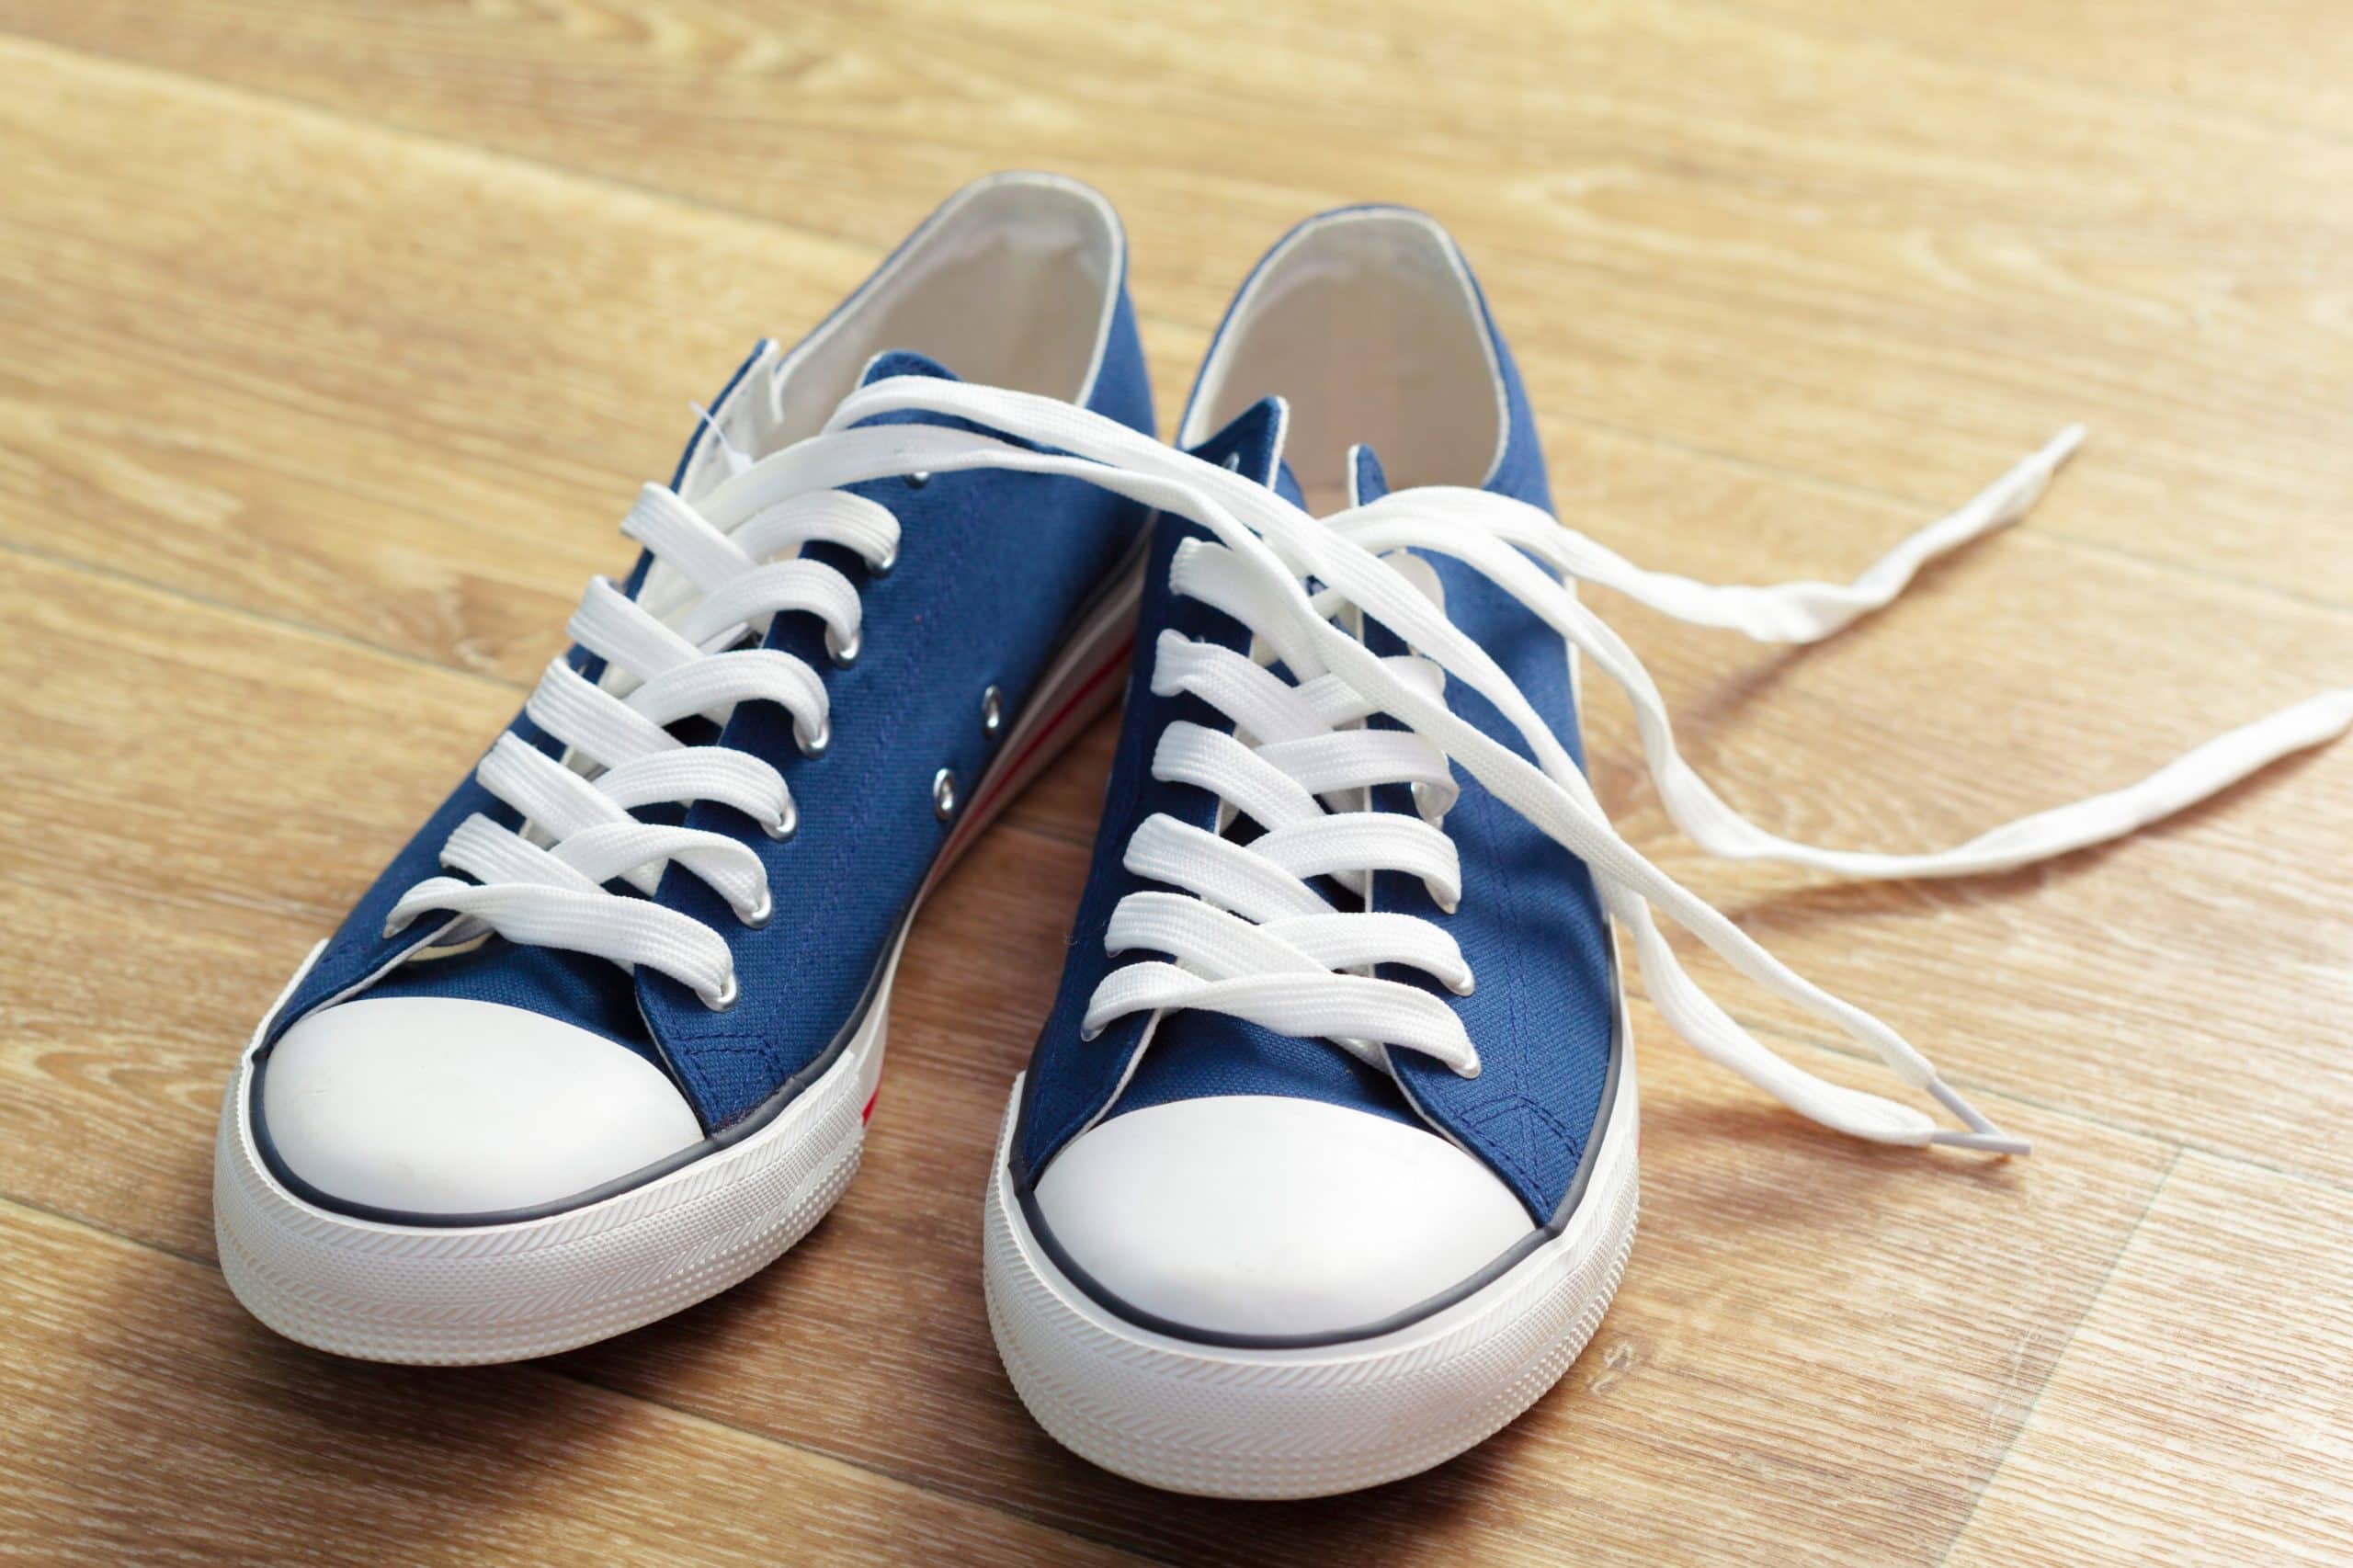 How to clean shoe laces